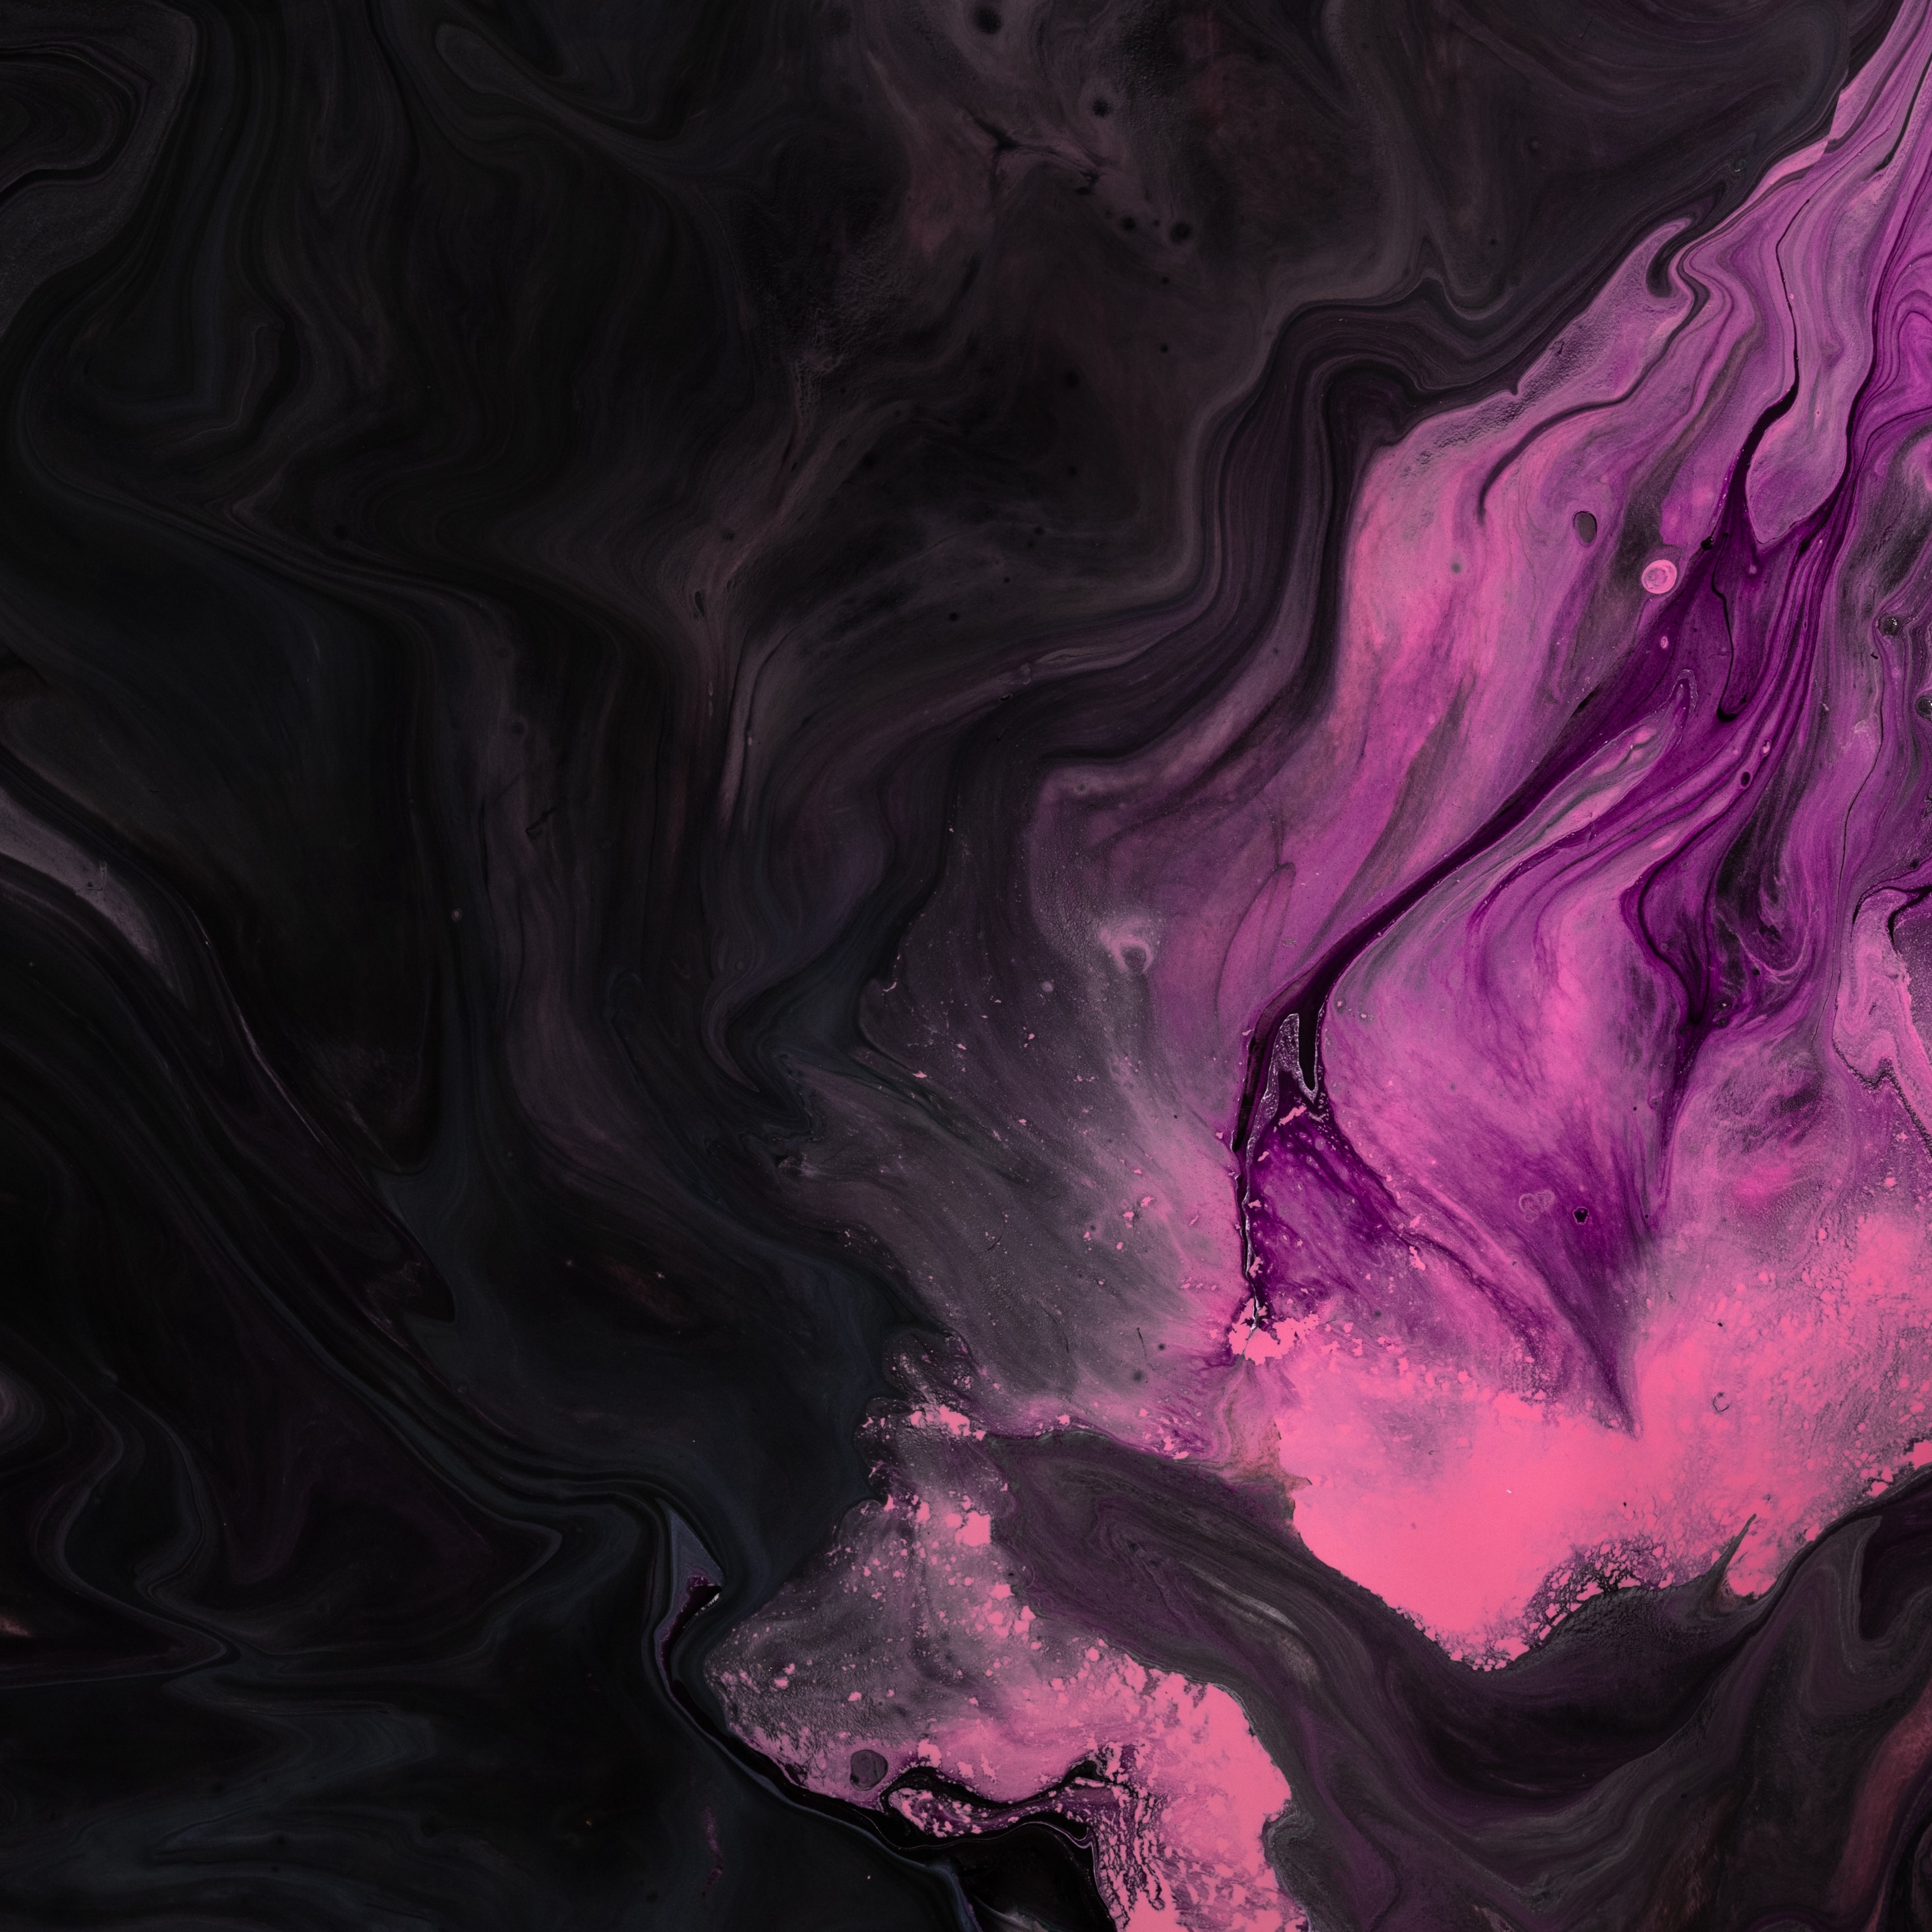 Wallpaper Paint Stains Pink Black Liquid And